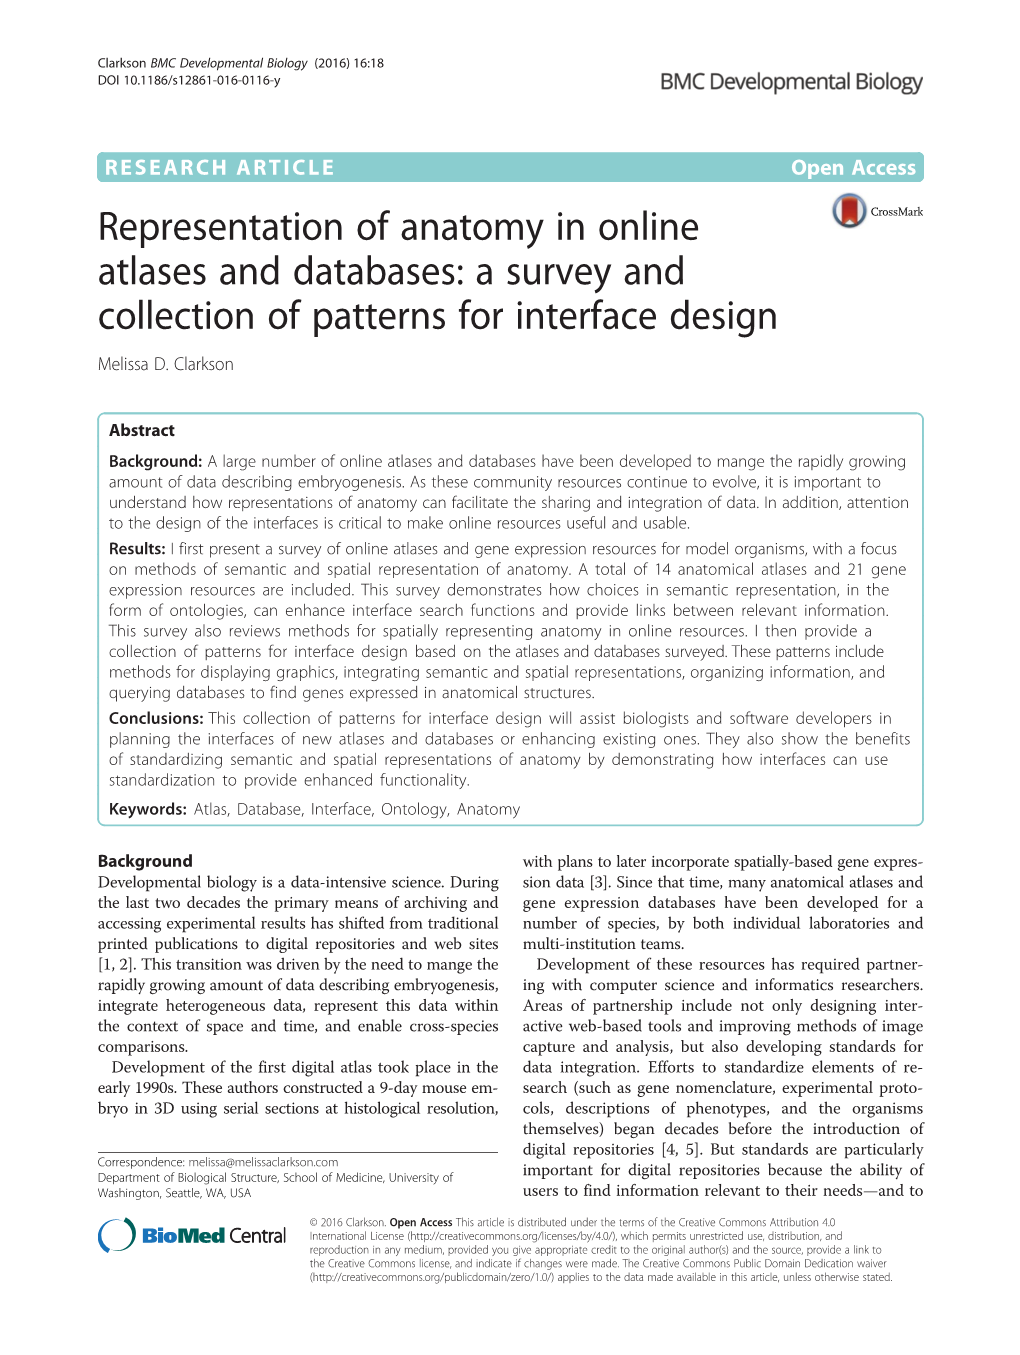 Representation of Anatomy in Online Atlases and Databases: a Survey and Collection of Patterns for Interface Design Melissa D